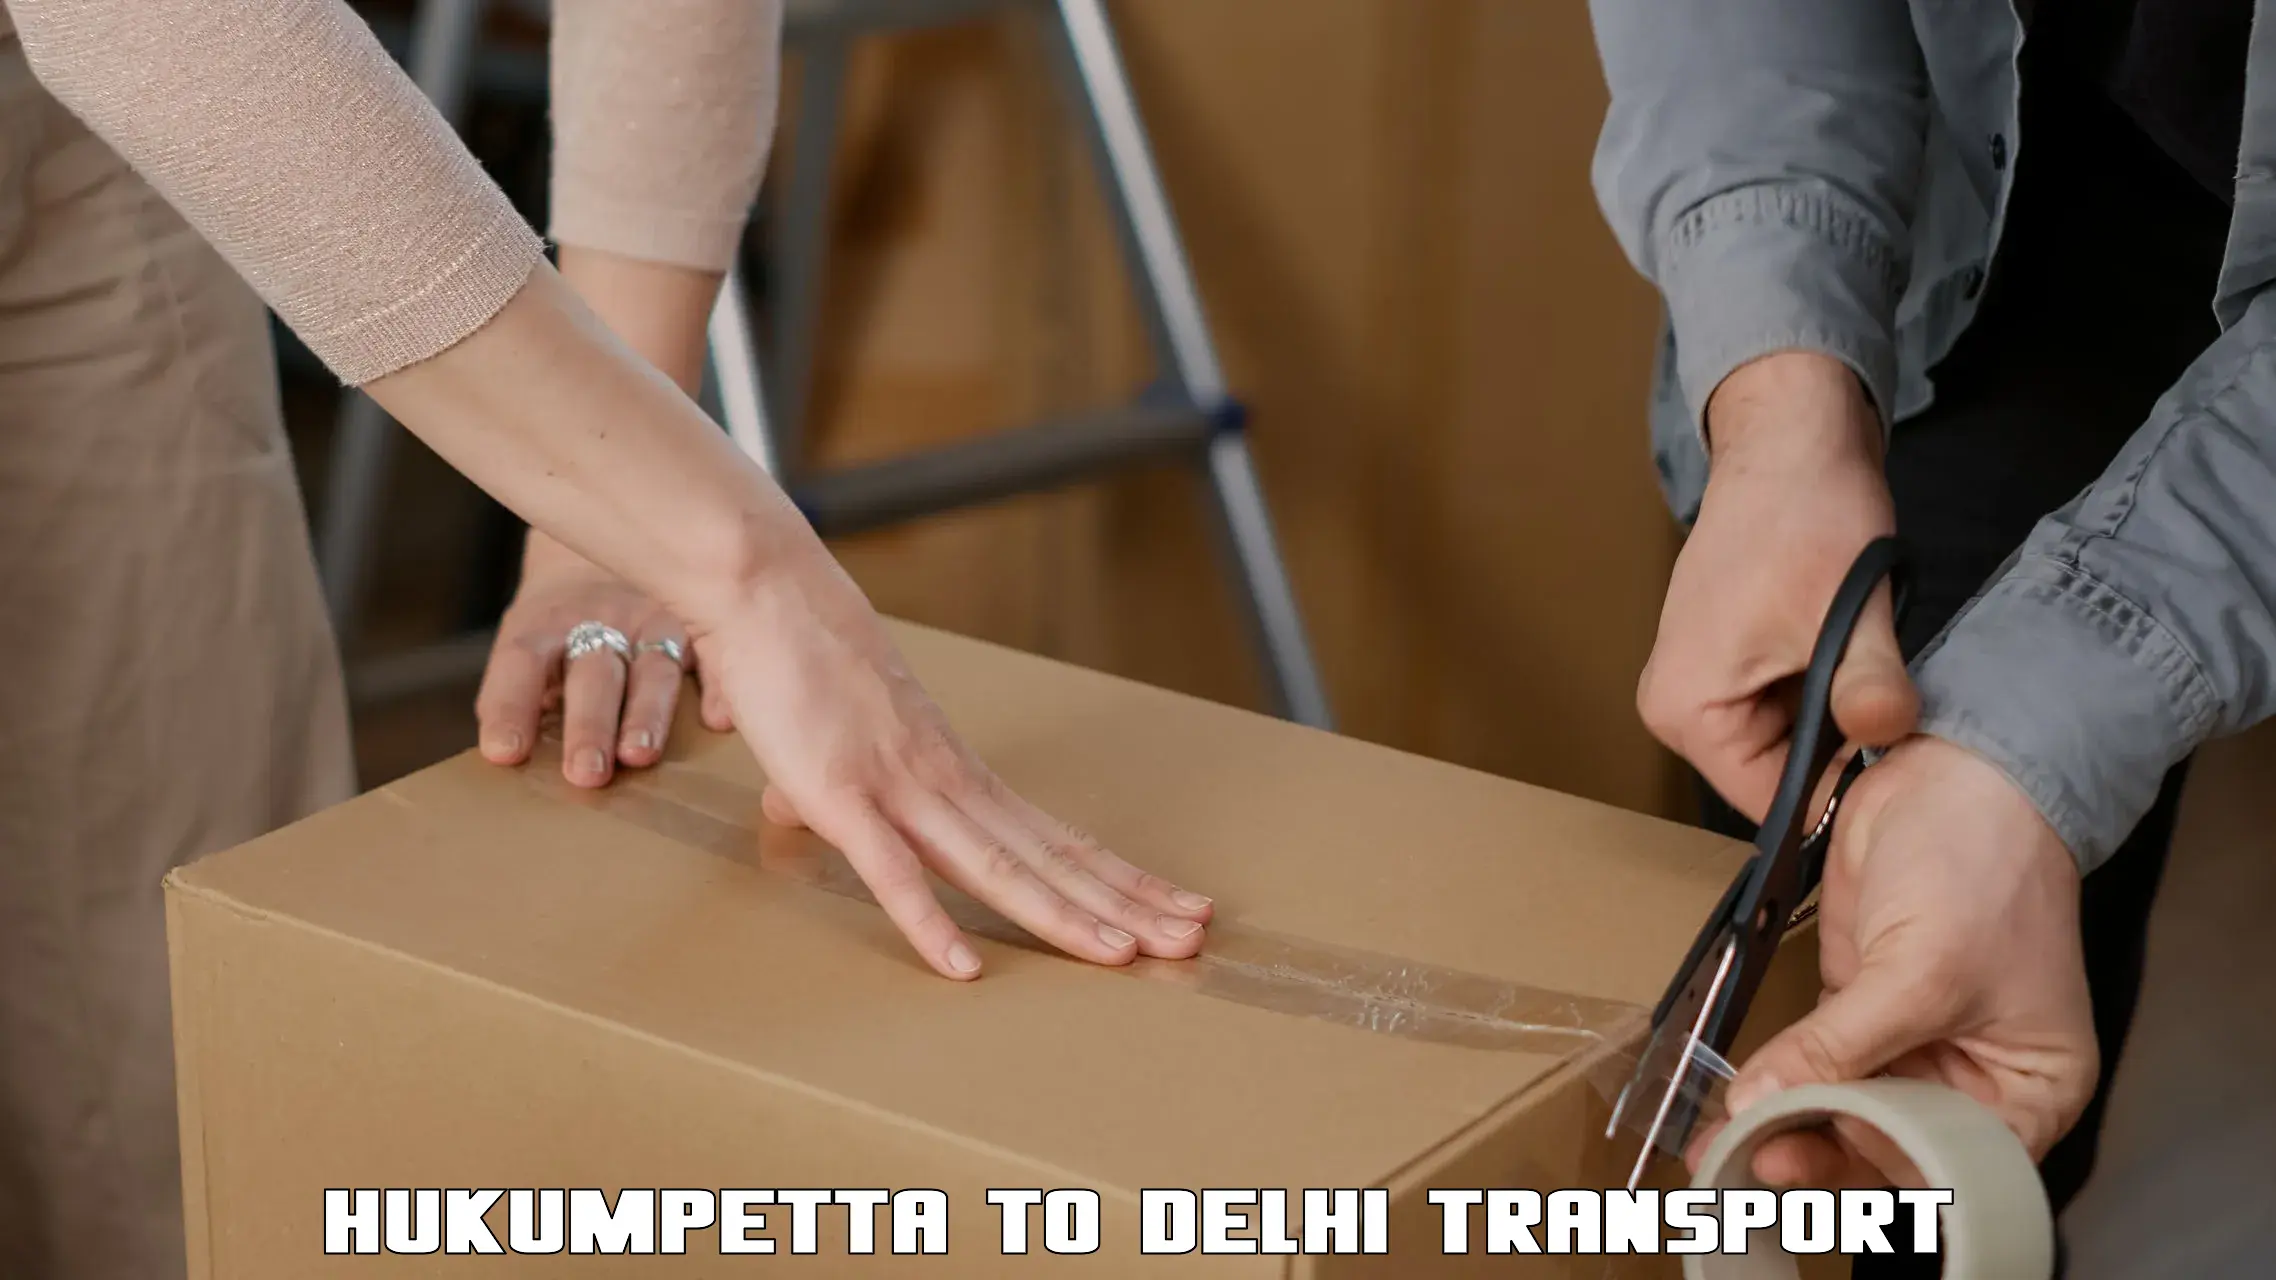 Truck transport companies in India Hukumpetta to NCR